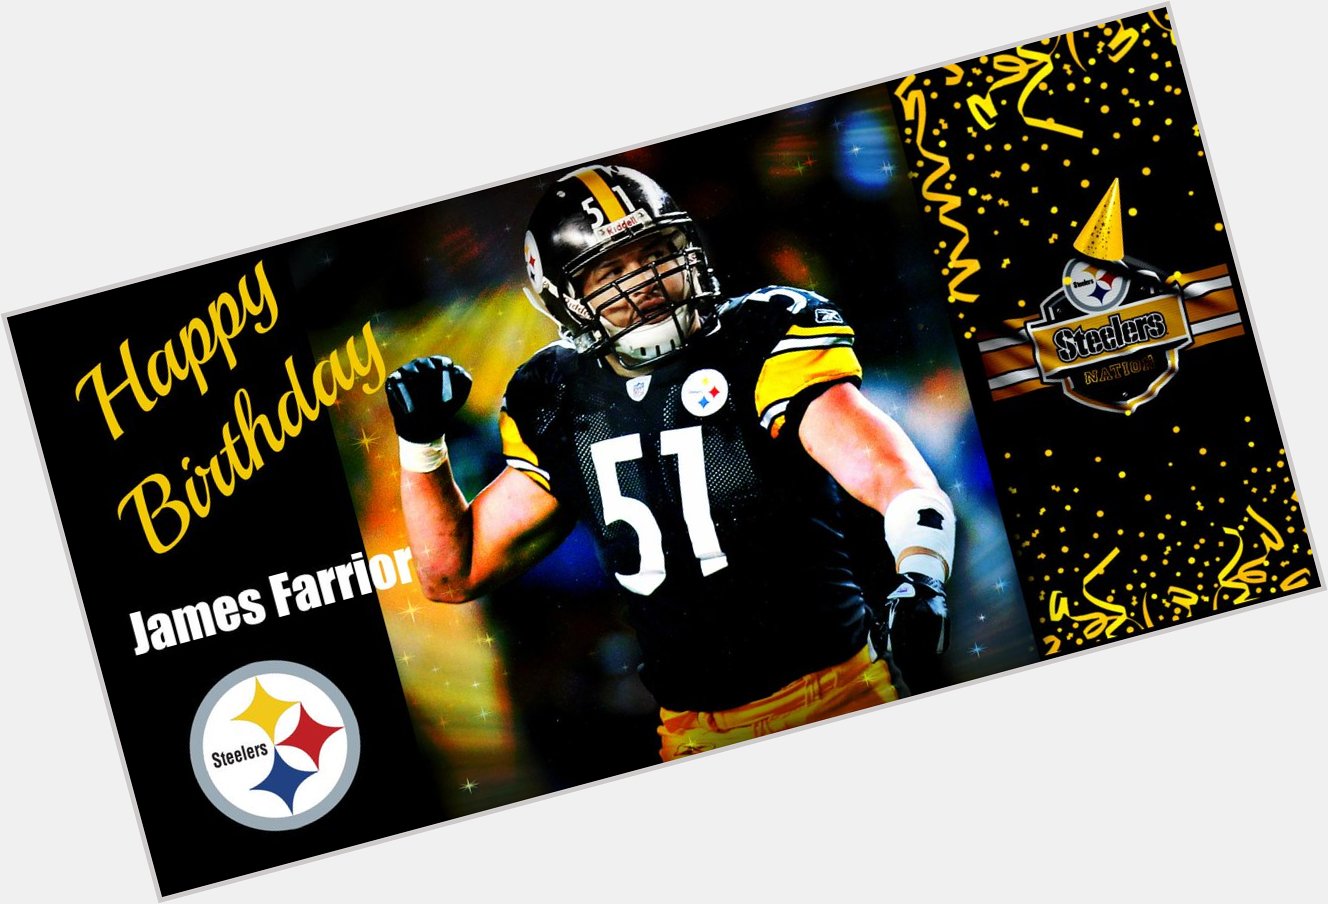 Wishing Steeler great James Farrior a Very Happy 40th BDay! 
Lots of happiness & blessings to you! 